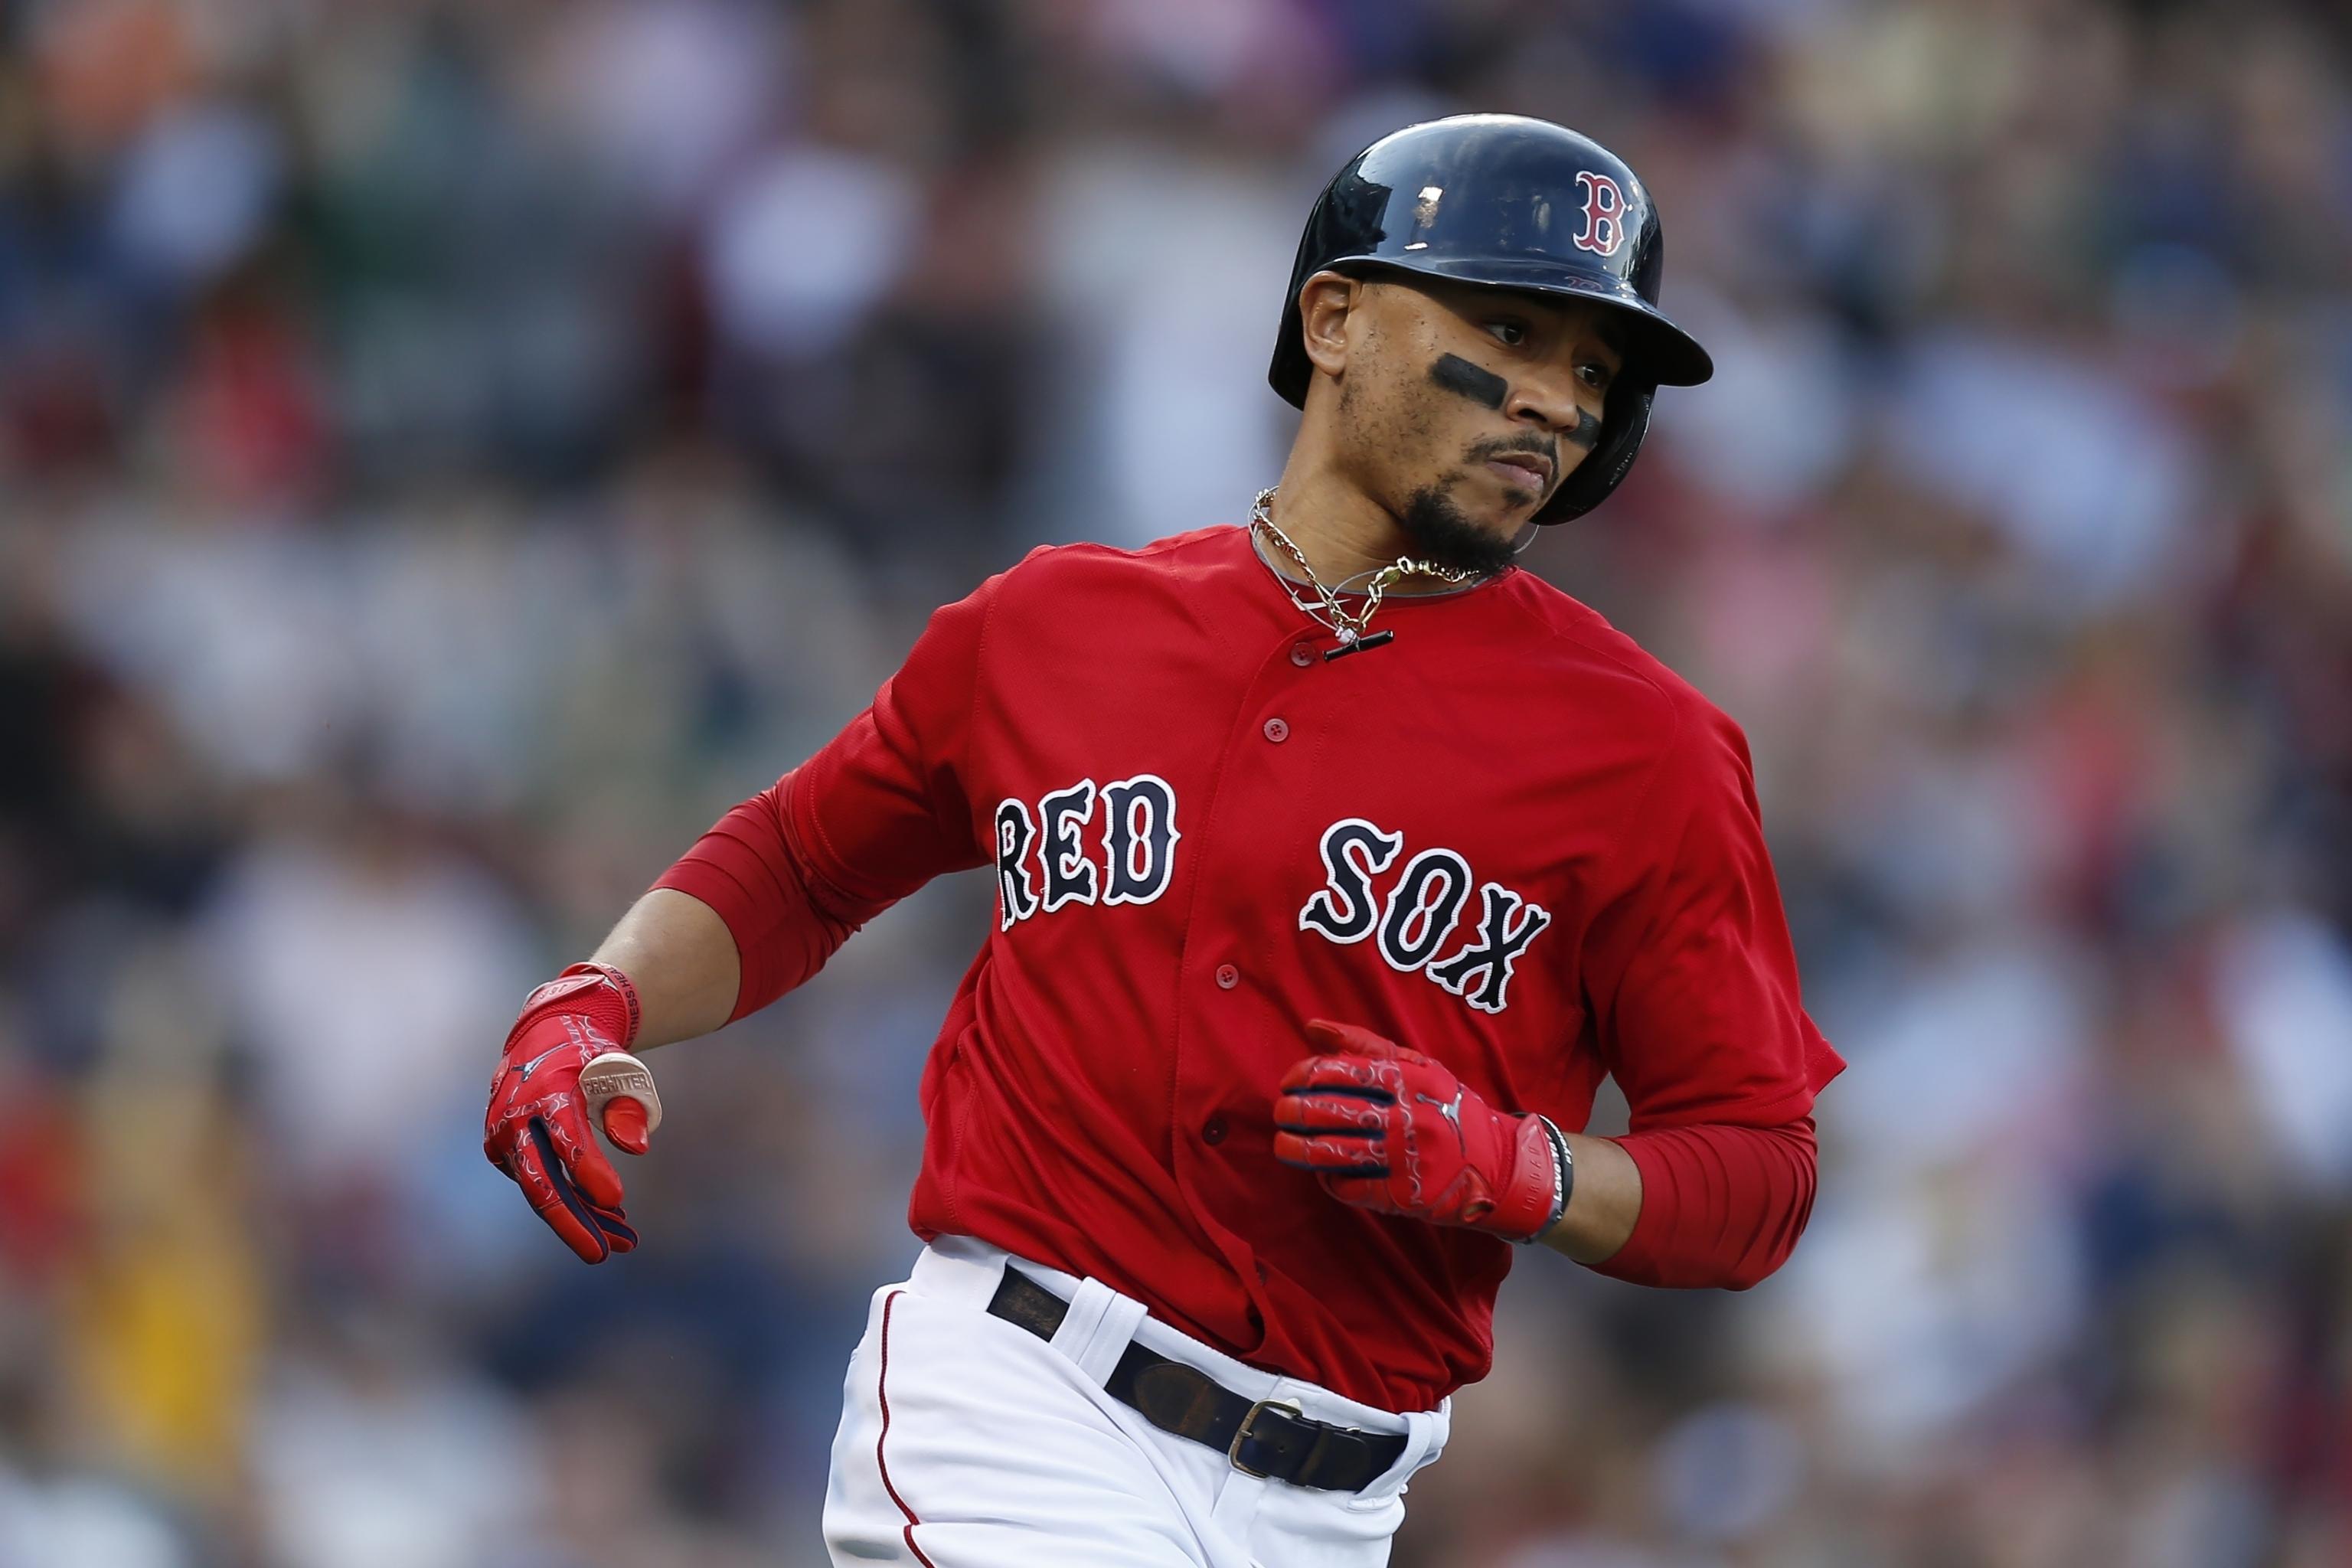 Sources: Red Sox trading Betts, Price to Dodgers